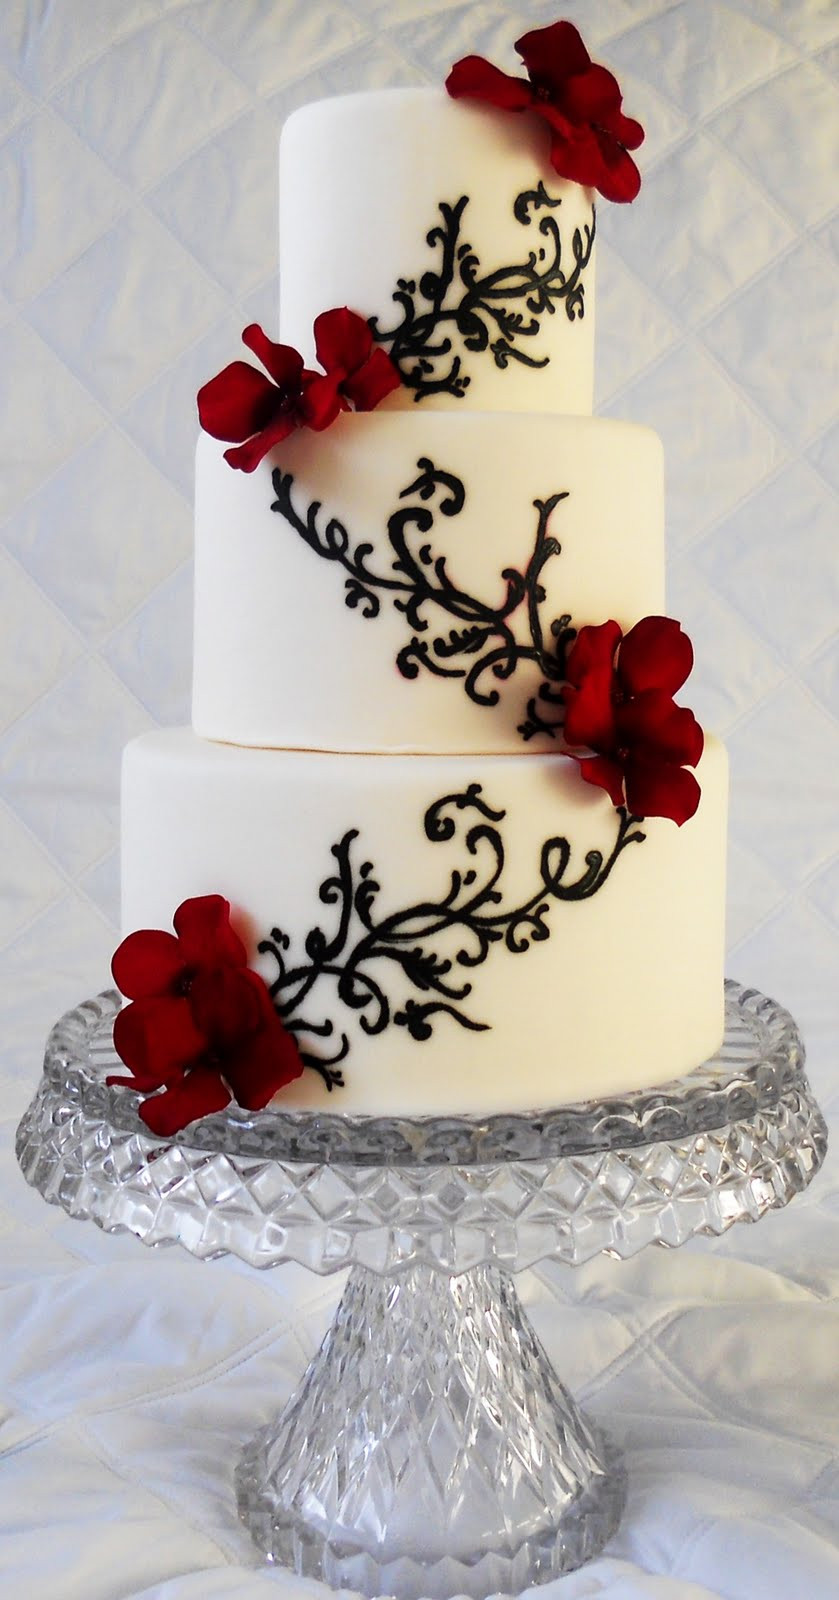 White And Red Wedding Cake
 Memorable Wedding Find the Best Red Black and White